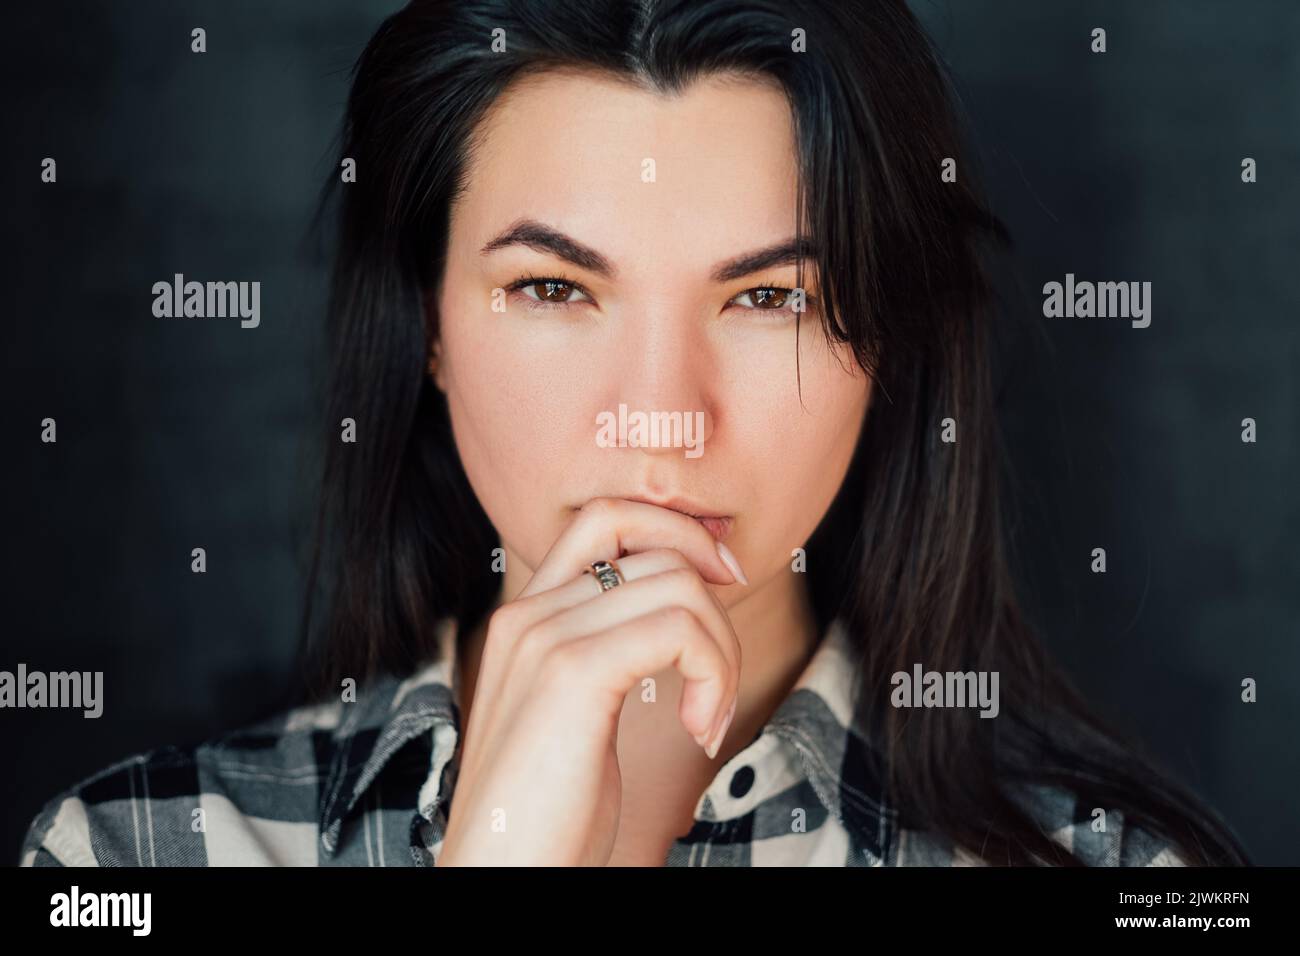 young woman speculation thoughtful decision time Stock Photo